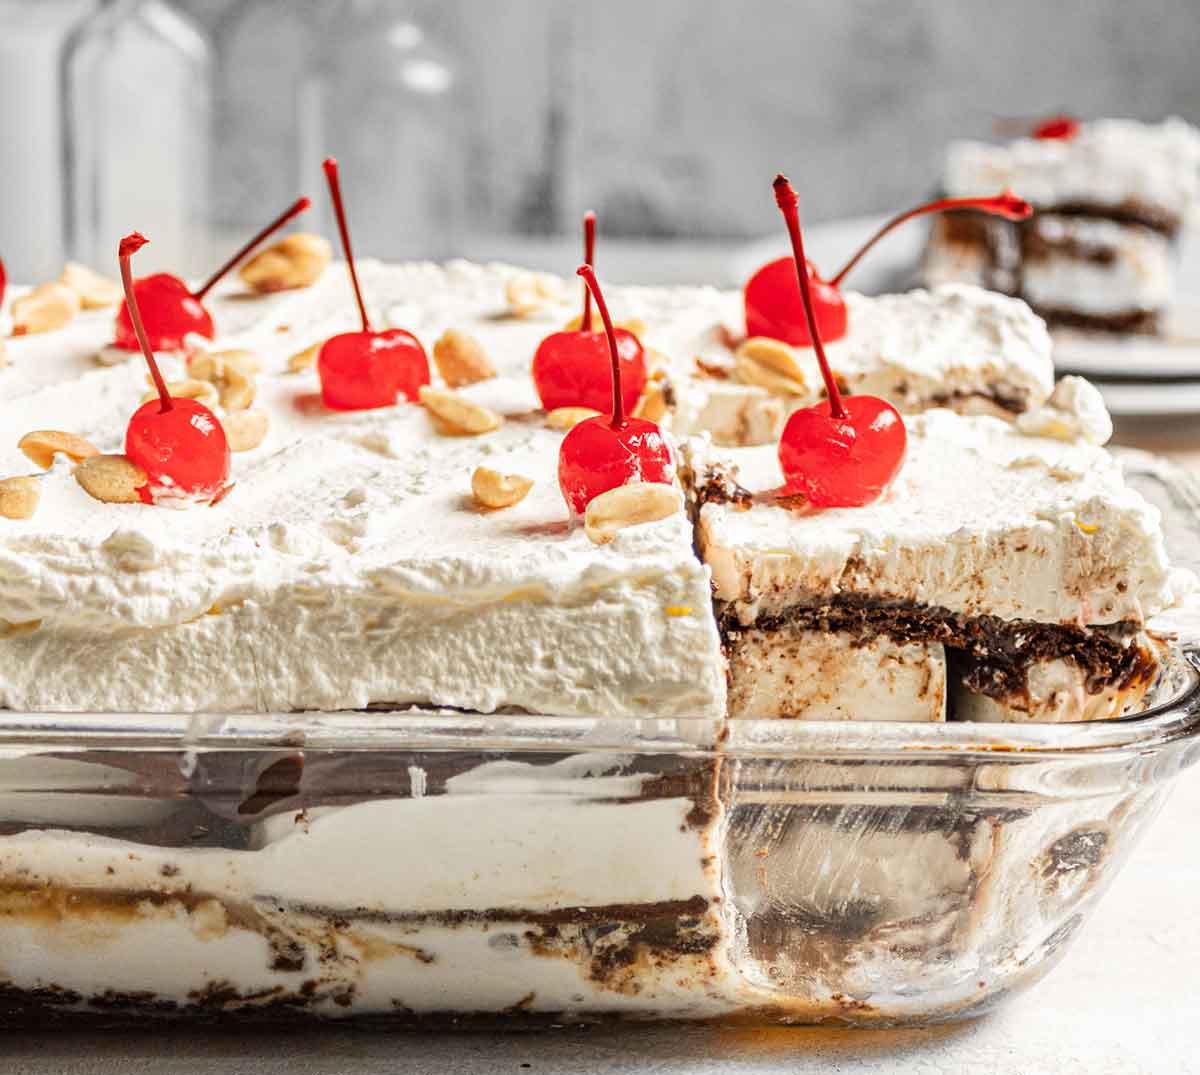 Side view of an assembled ice cream sandwich cake in glass baking dish.